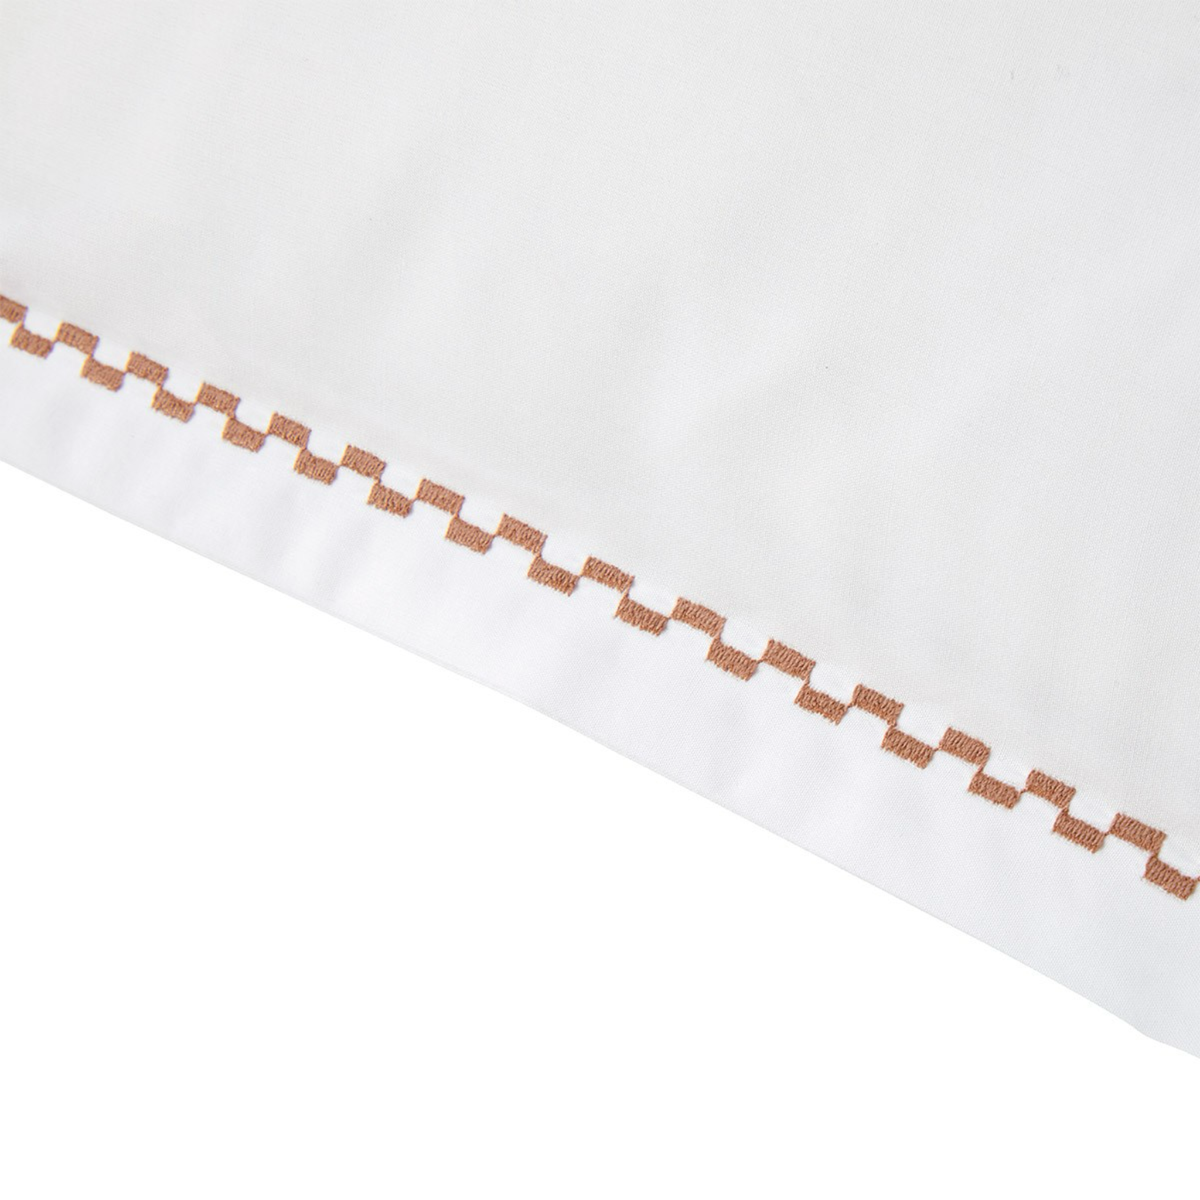 Swatch Sample of Yves Delorme Alienor Bedding in Sienna Color